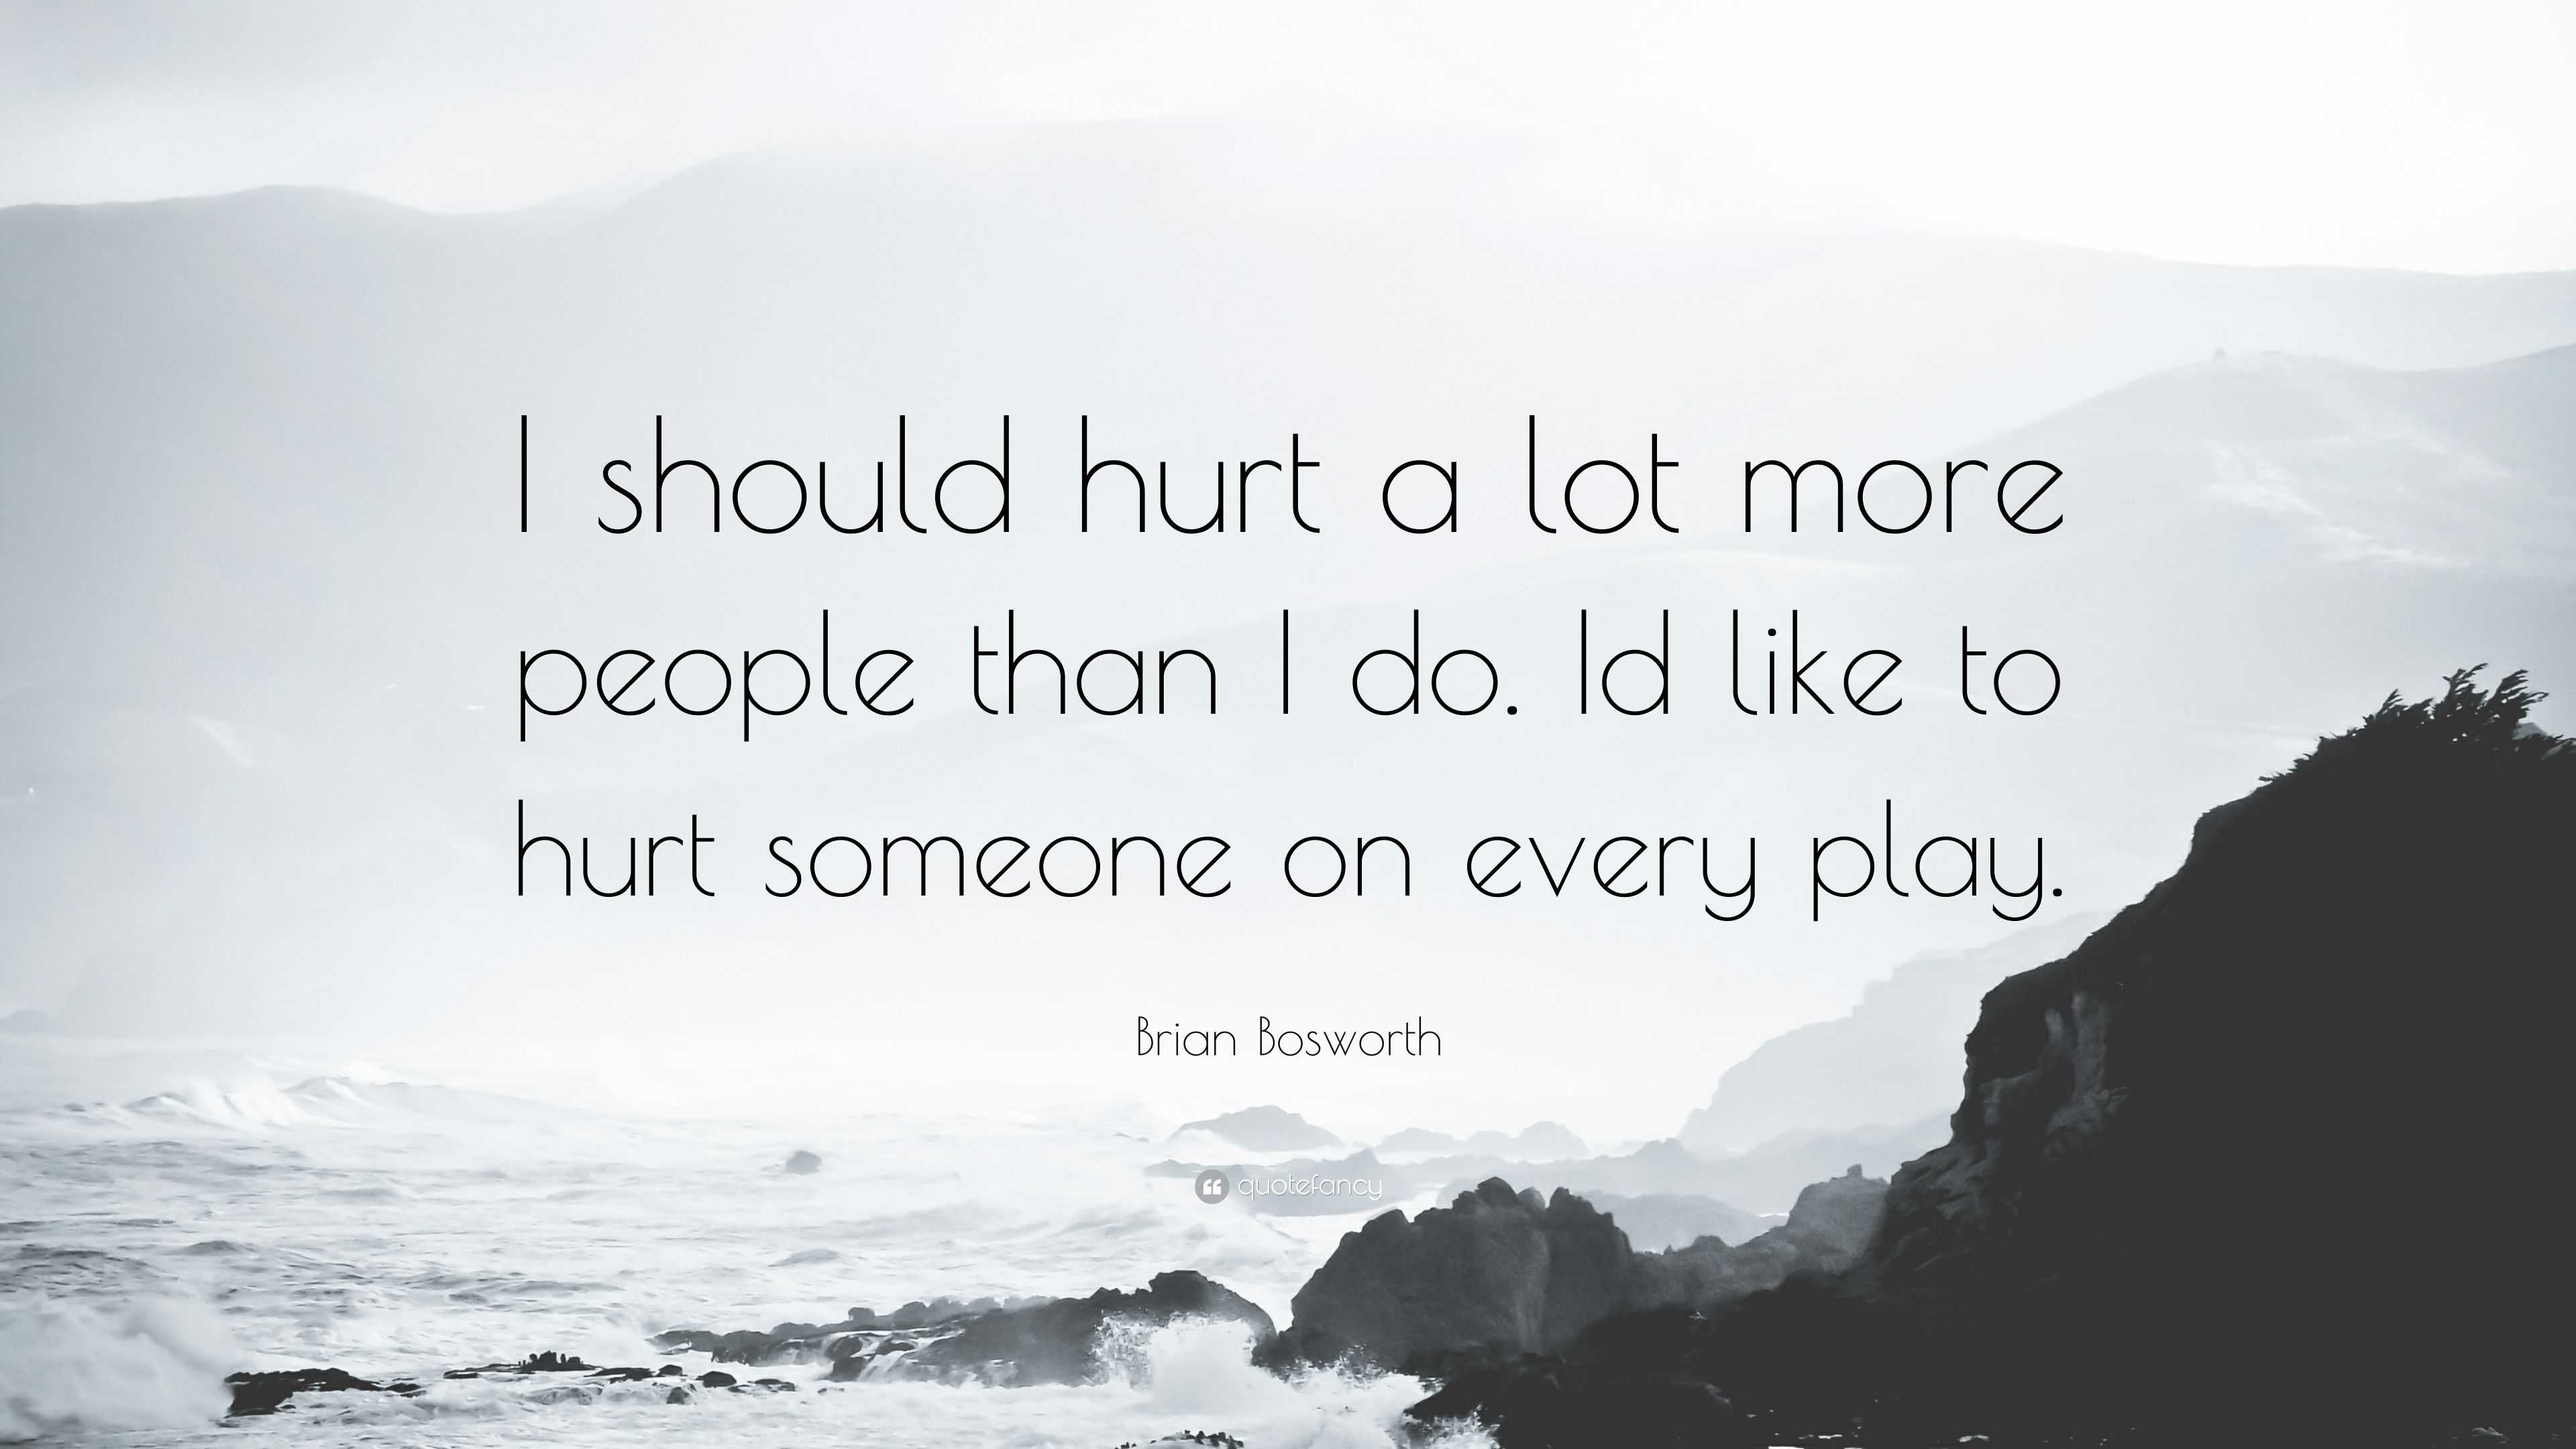 Brian Bosworth Quote: “I should hurt a lot more people than I do. Id